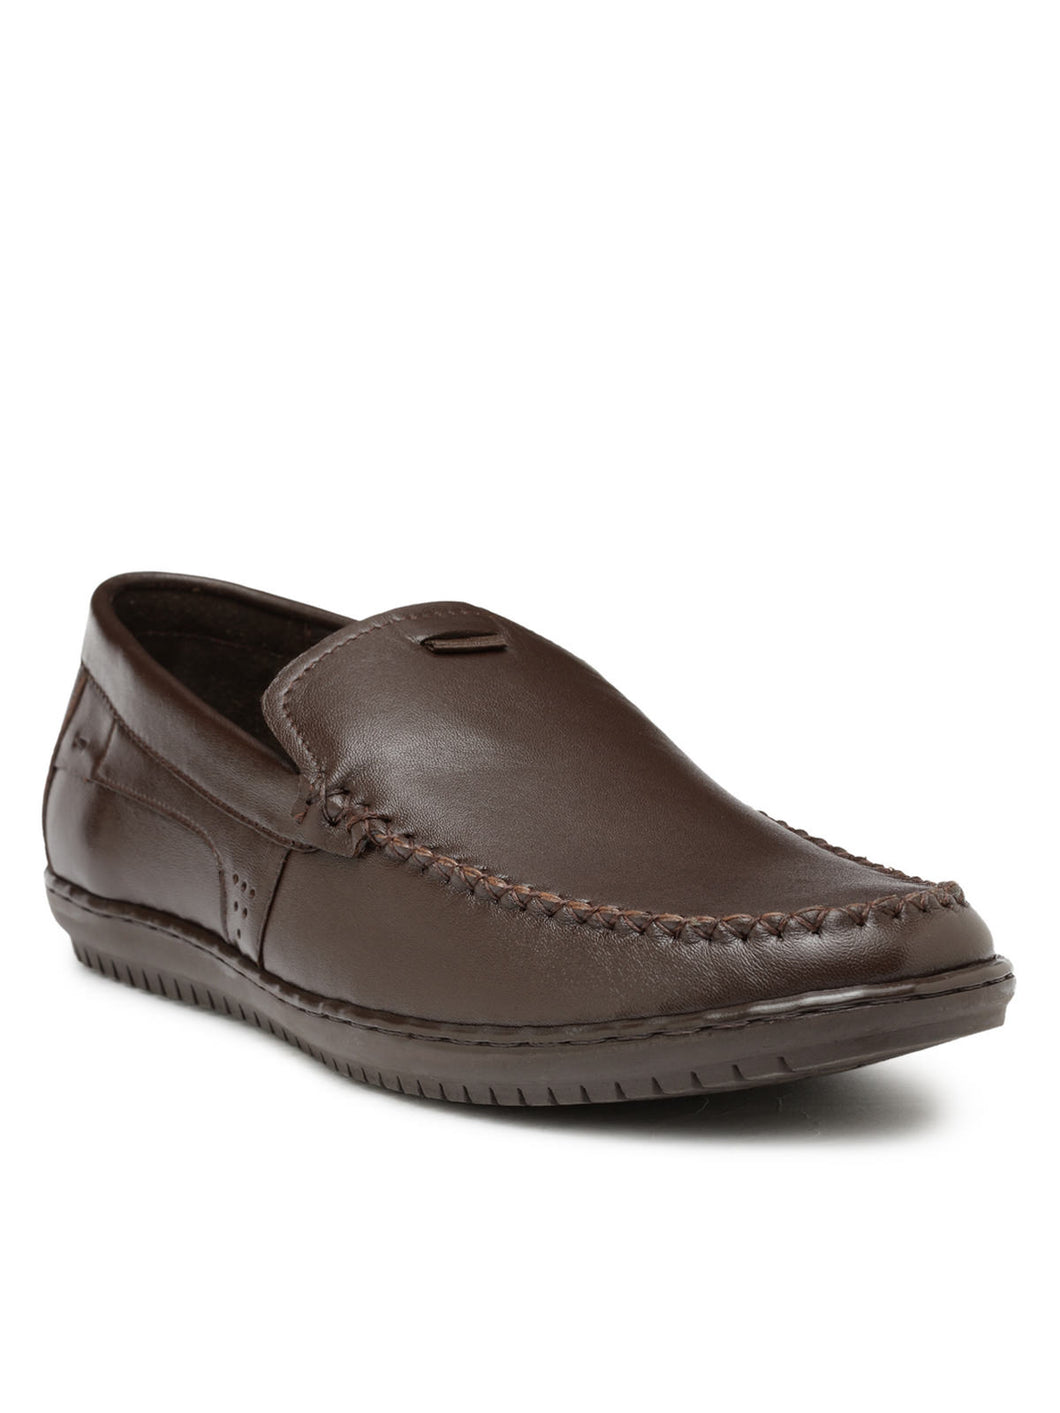 Teakwood Leather Brown Casual Shoes